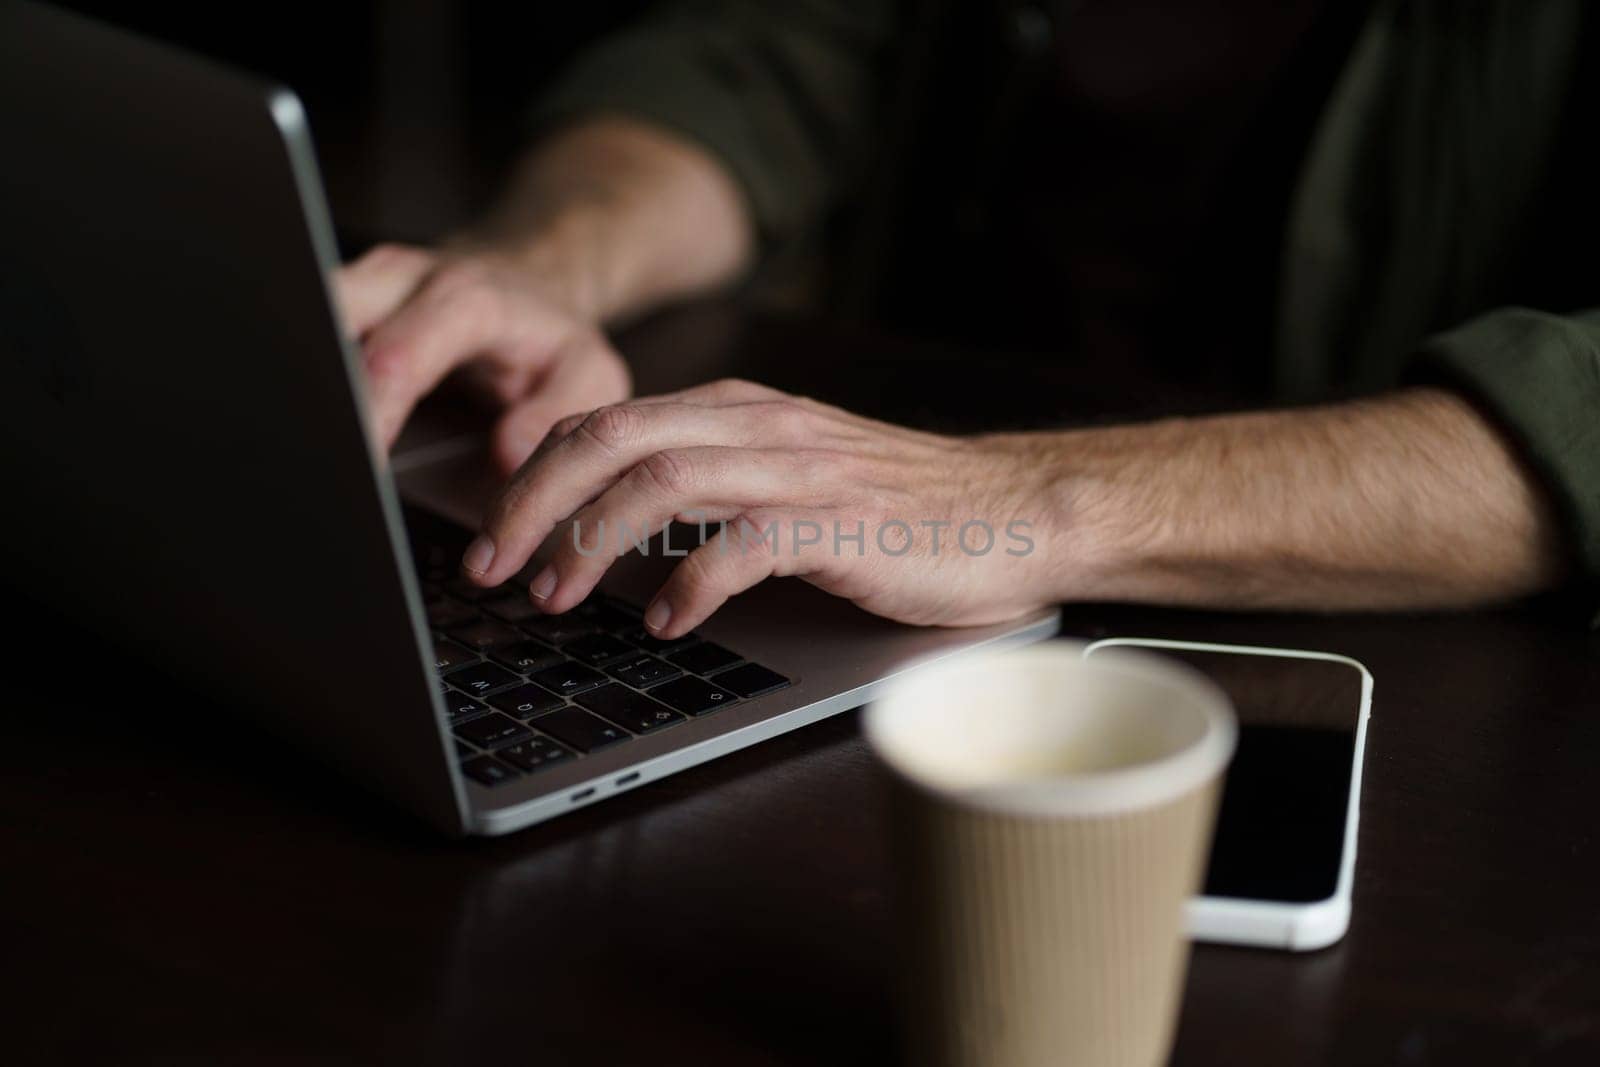 Hands of senior man types message on laptop keyboard. Individuality and essence of senior man's hands, highlighting engagement with technology and digital communication. High quality photo